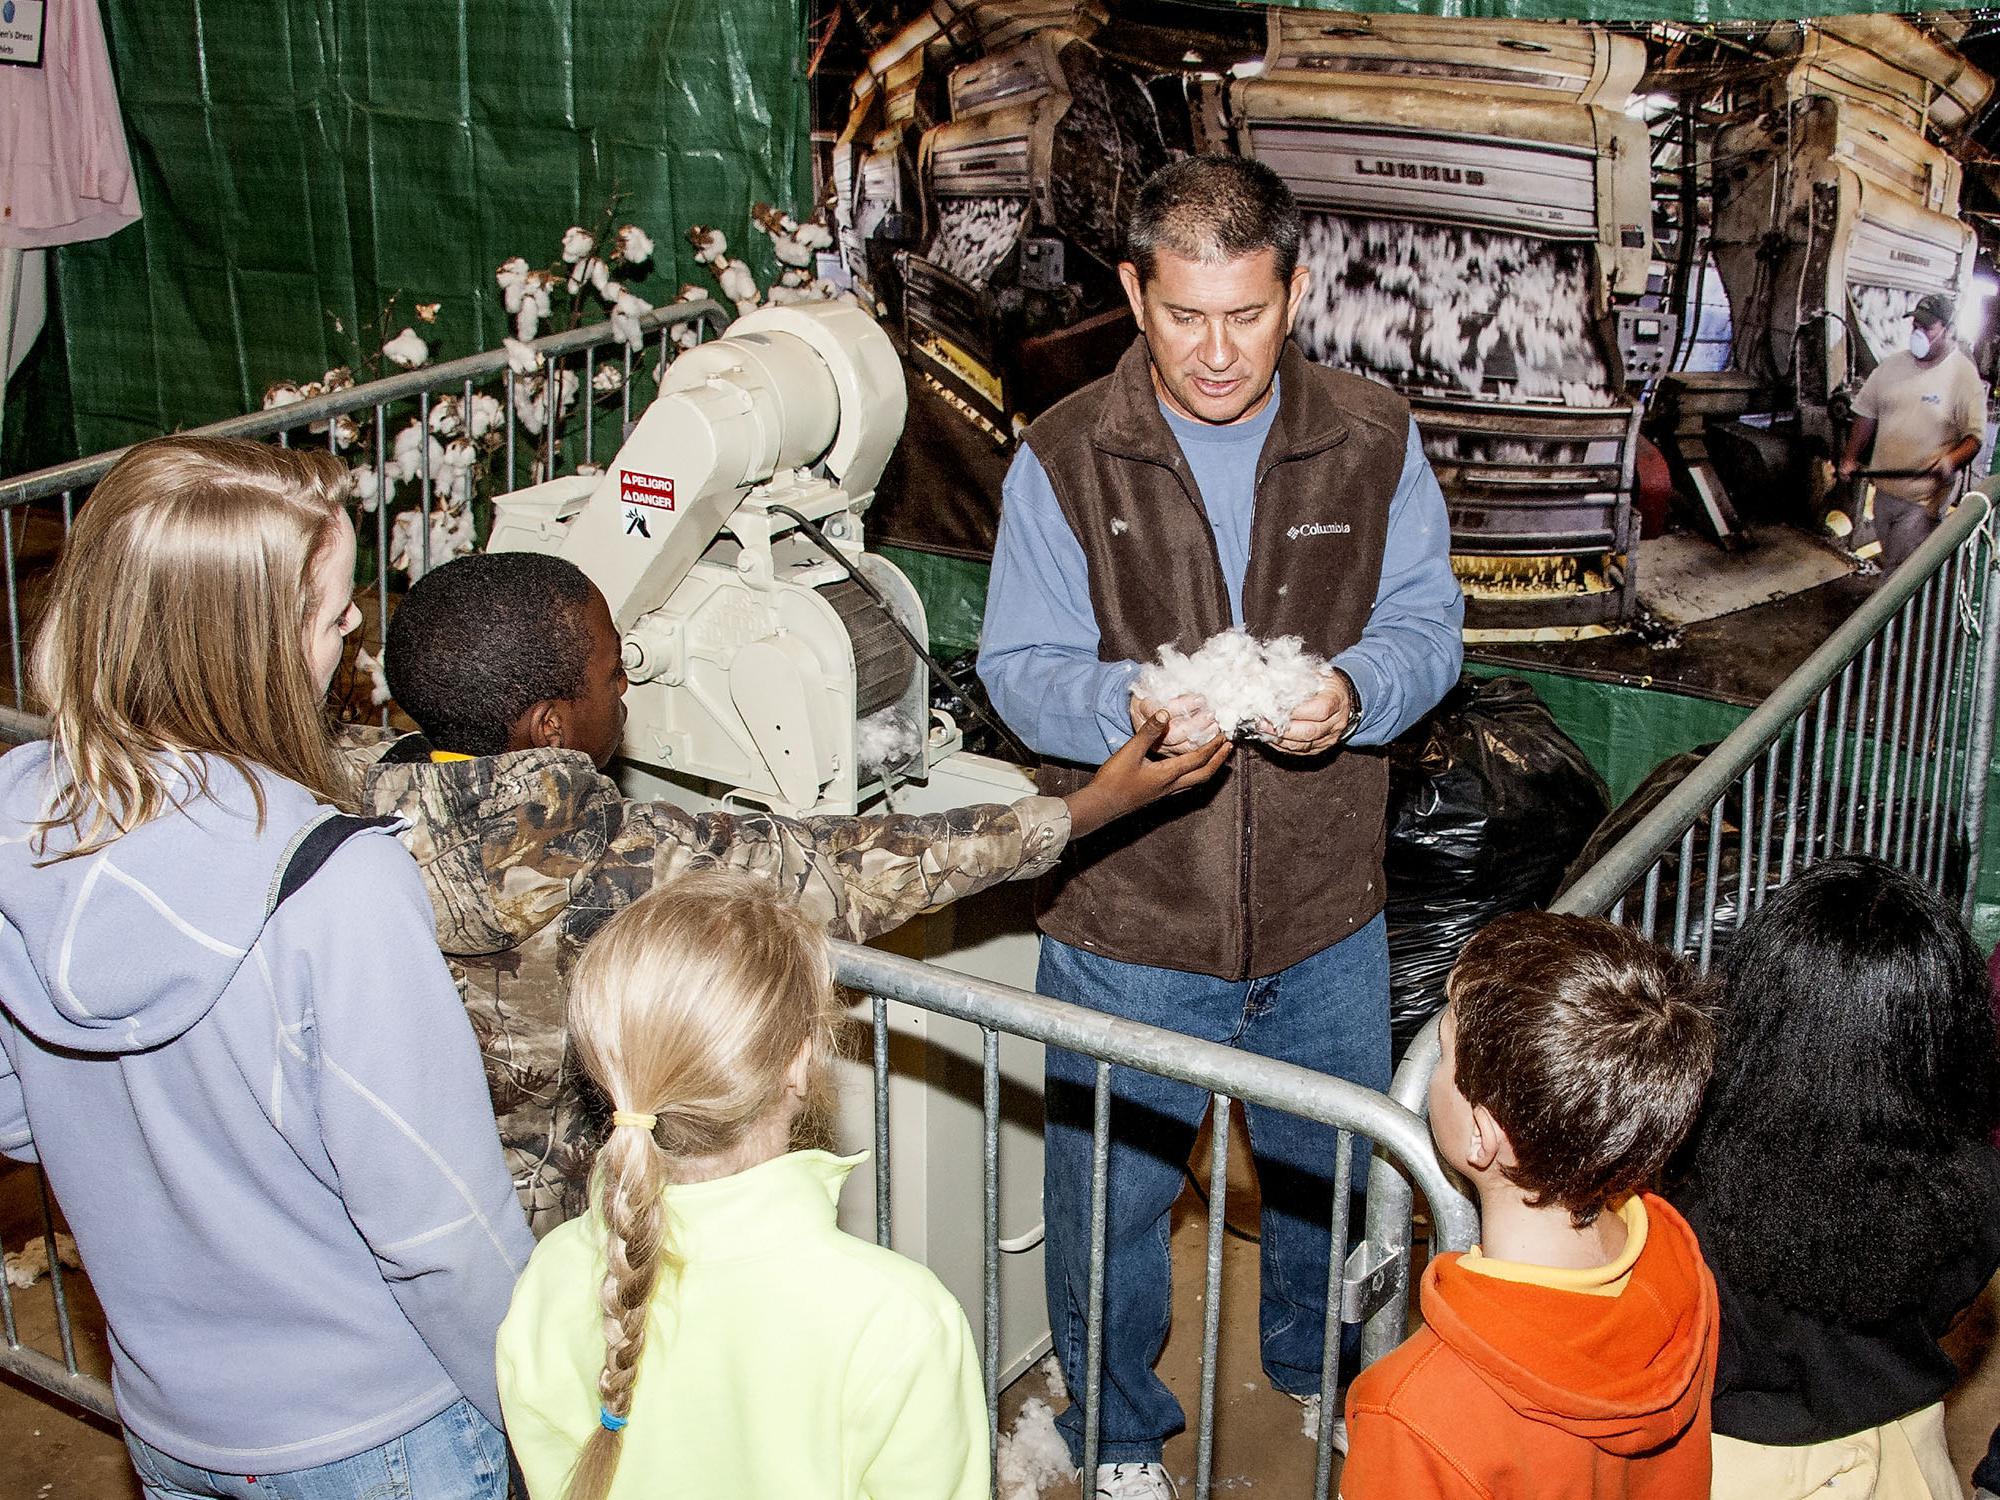 Dennis Reginelli, an area agronomic crops agent with the Mississippi State University Extension Service, explains the ginning process that helps create cotton fabrics. Addressing primarily third-graders at the Mississippi Horse Park on Nov. 7, 2013, Reginelli and the cotton exhibit were part of Farmtastic, a four-day educational program designed to help children learn the sources of their food, clothing and other products. (Photo by MSU Ag Communications/Scott Corey)